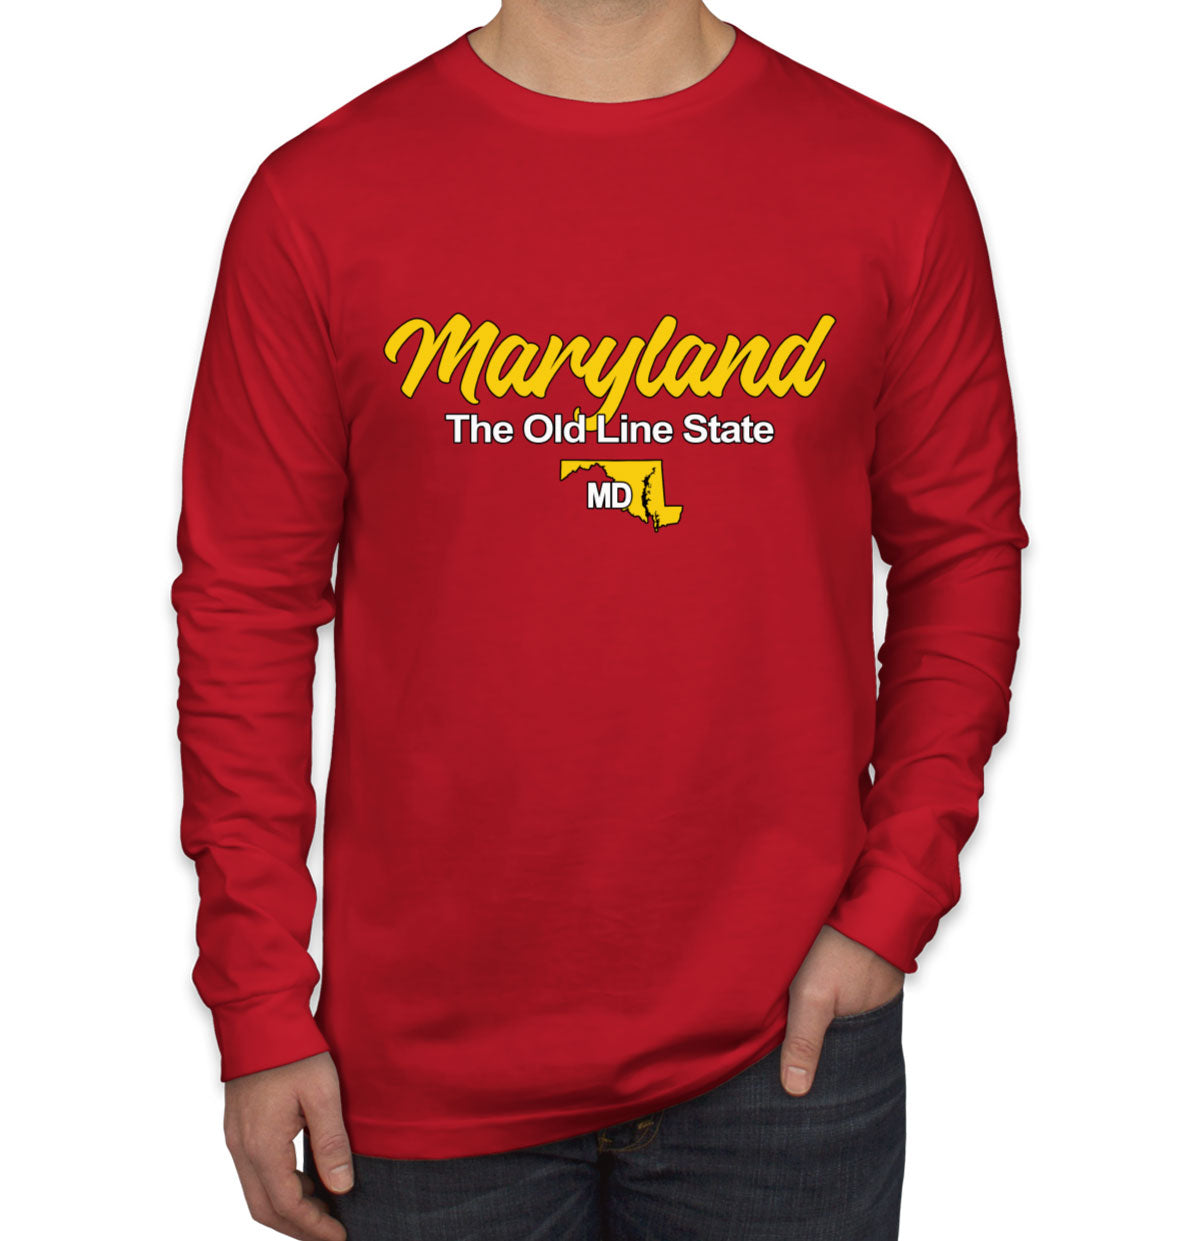 Maryland The Old Line State Men's Long Sleeve Shirt